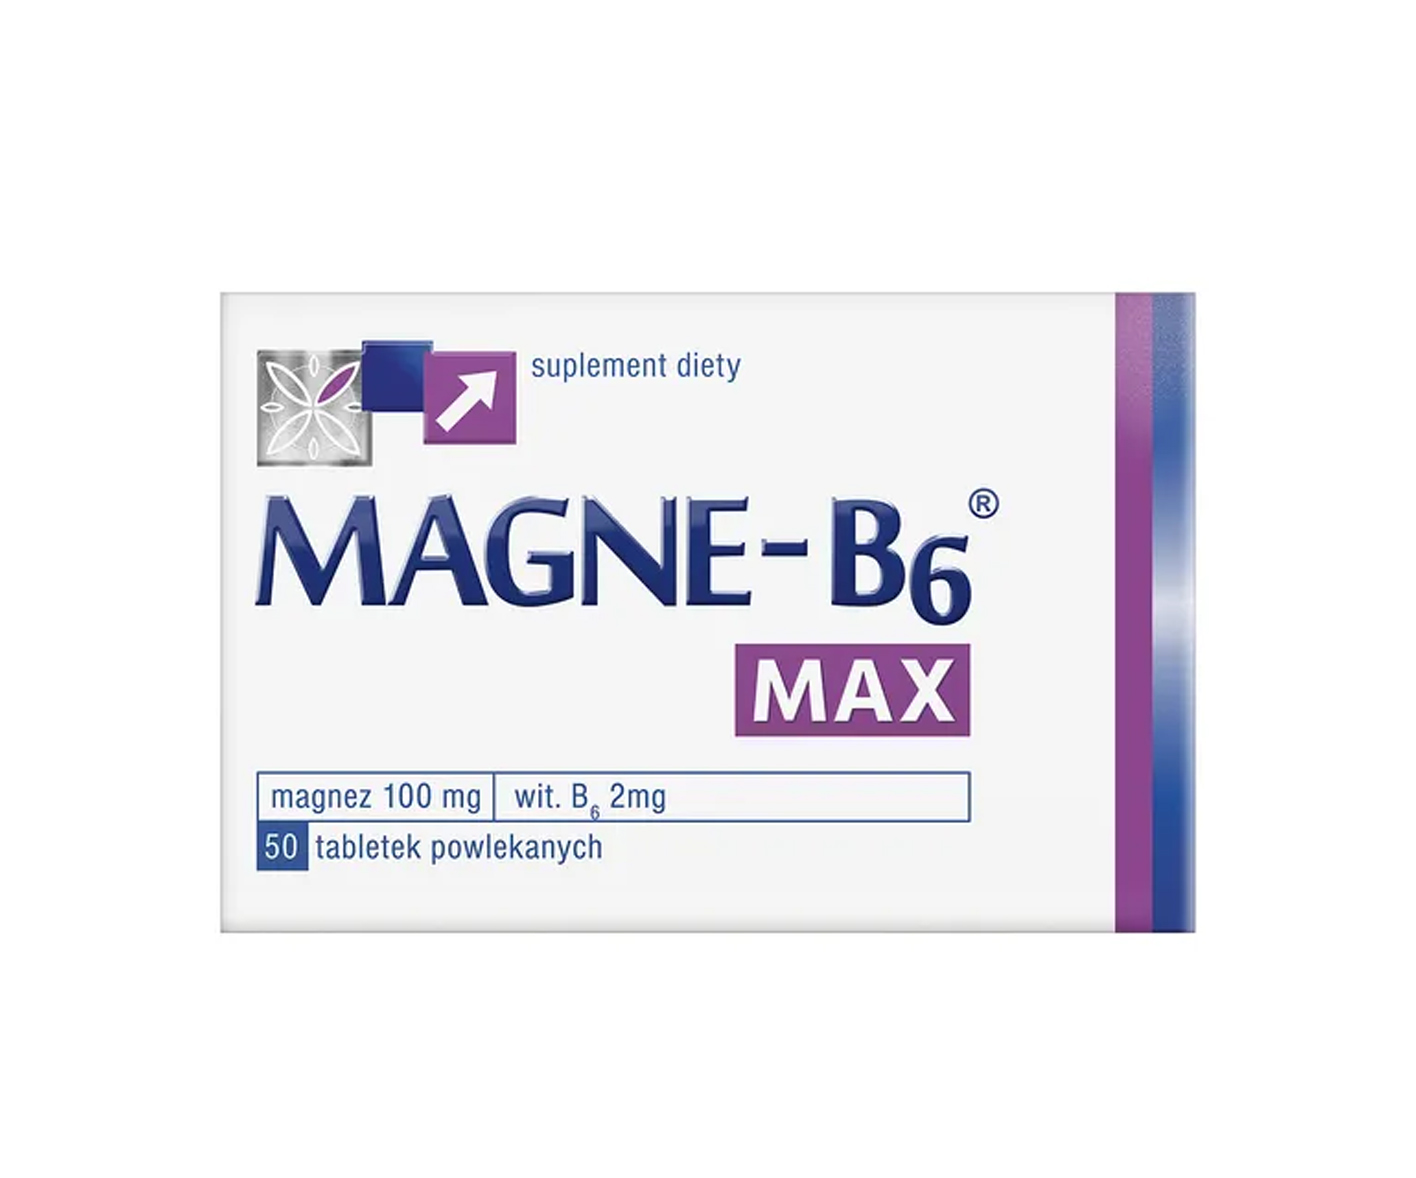 Opella Healthcare, Magne B6 Max, dietary supplement